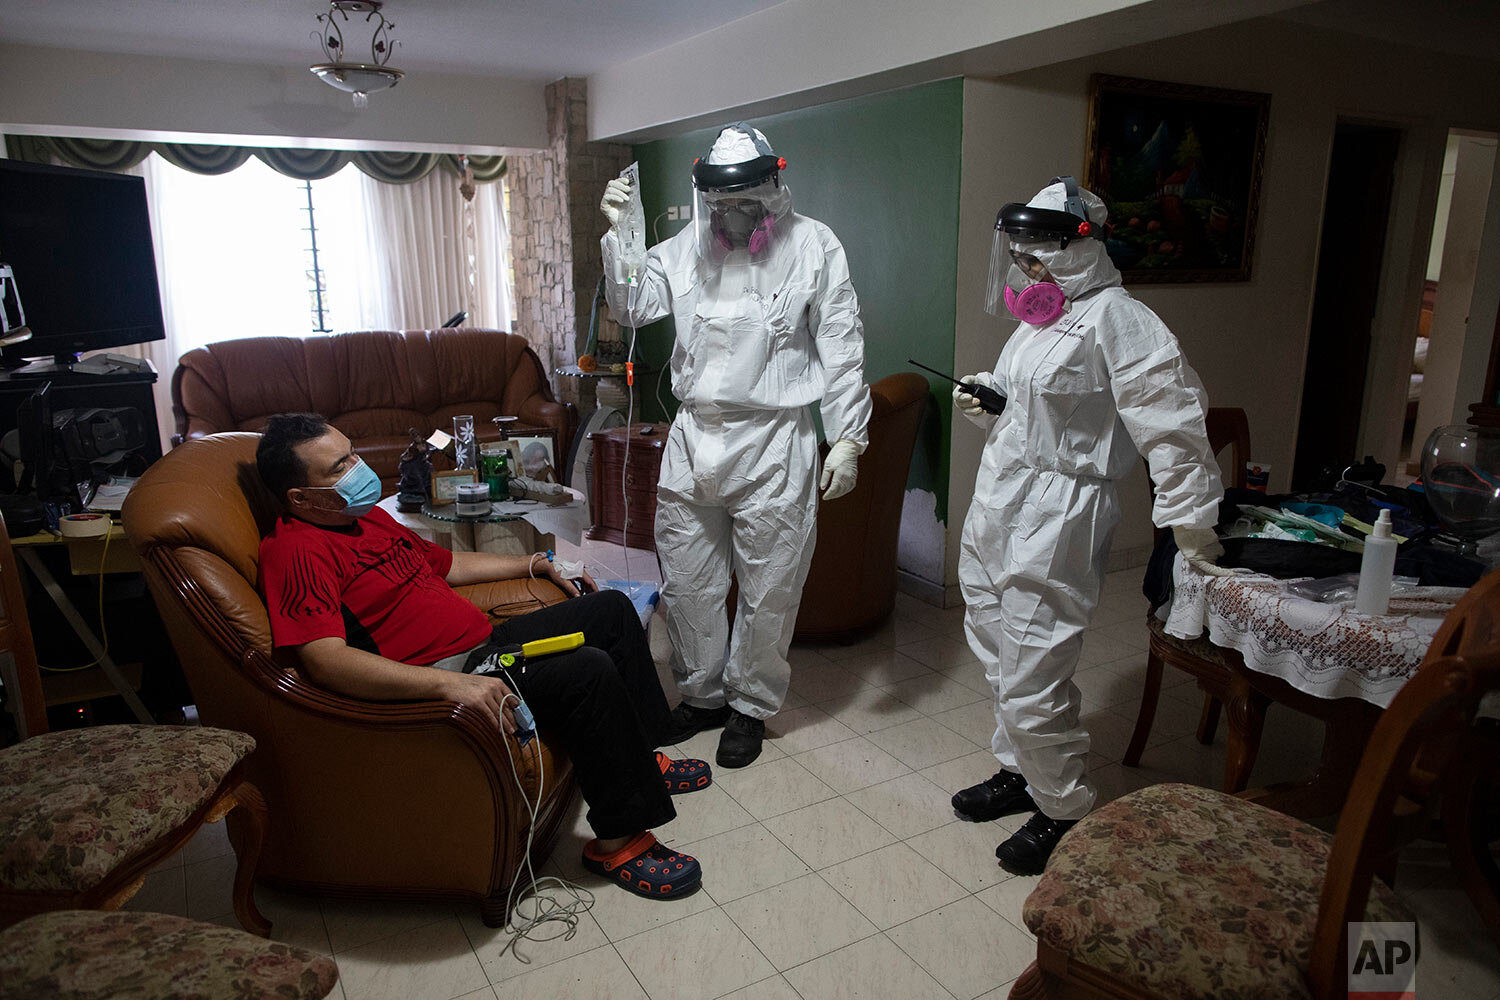  Angels of the Road volunteer paramedic Zully Rodiz, right, and Dr. Brayan Alfaro, measure the vital signs readings of a person suspected of having COVID-19, at his home in Caracas, Venezuela, Thursday, Feb. 11, 2021. (AP Photo/Ariana Cubillos) 